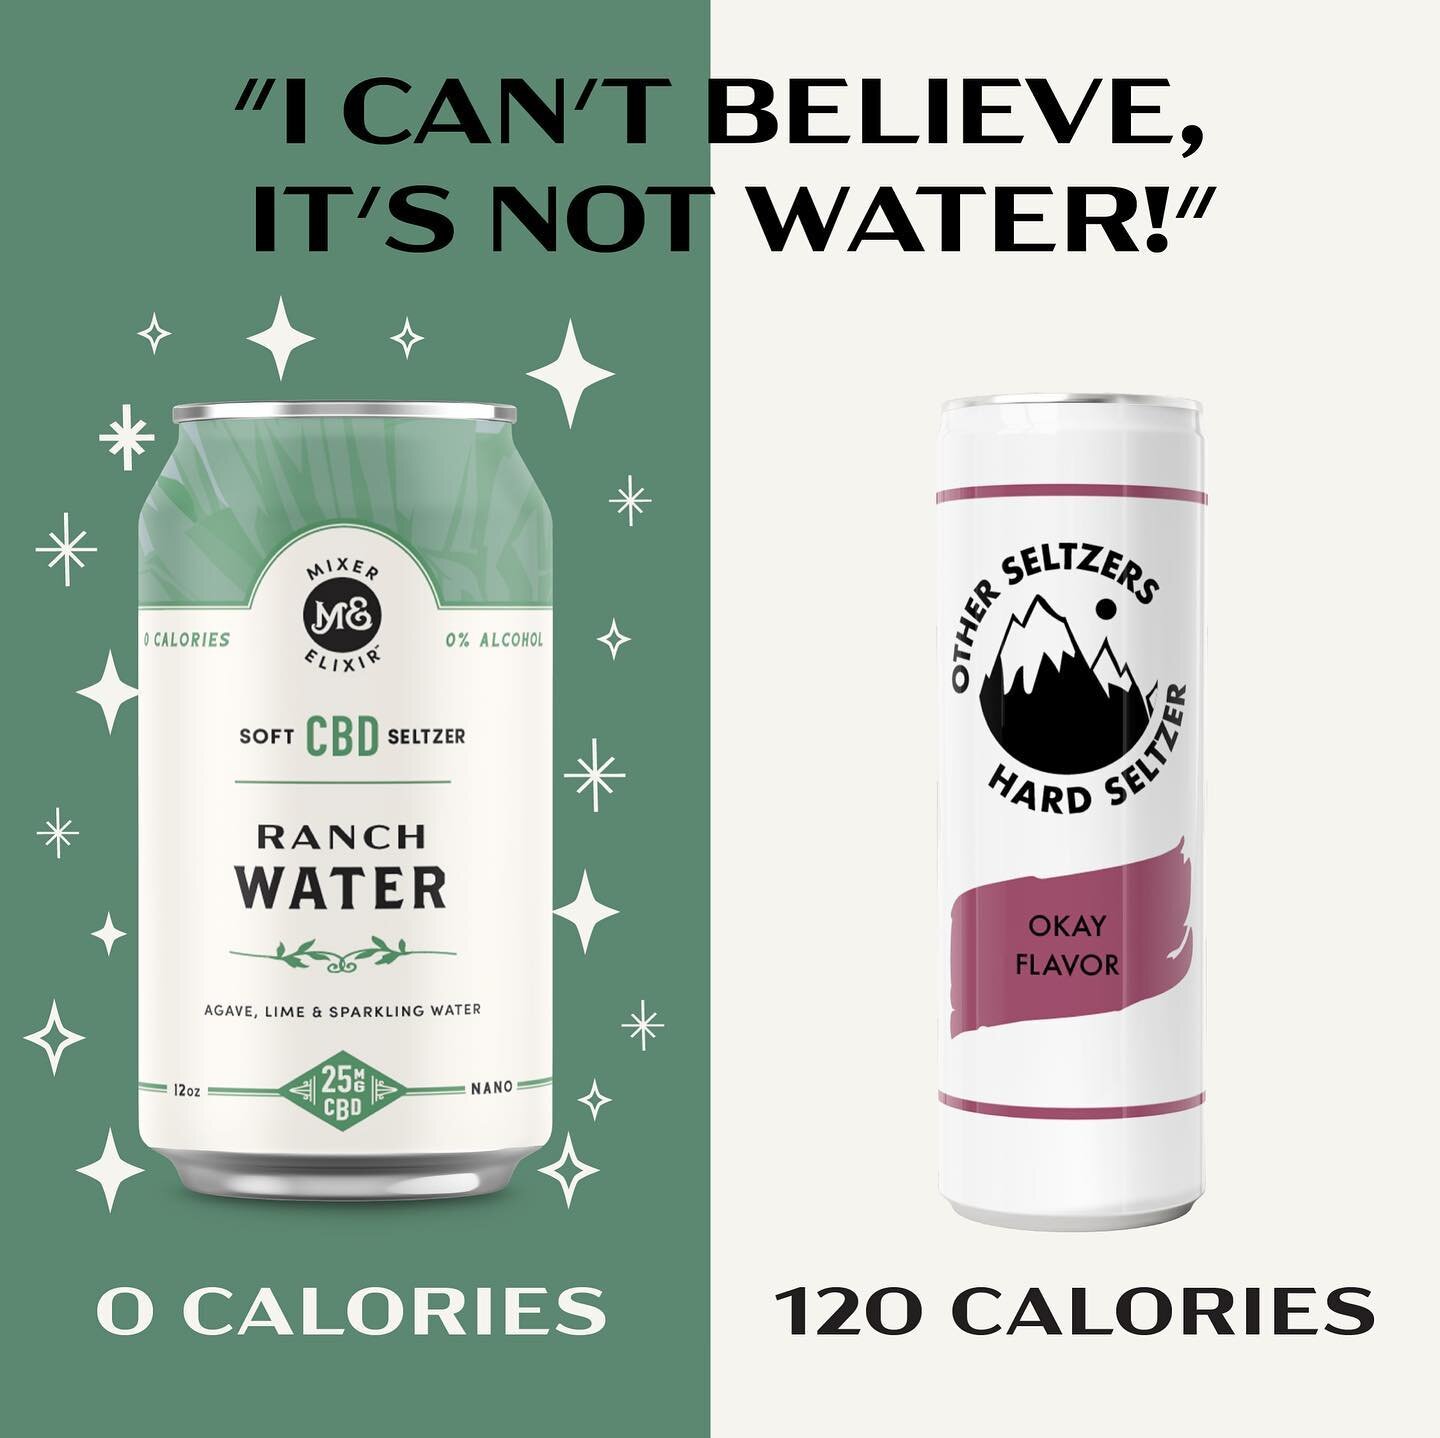 No calories, no hangovers, all fun!? 🌵🕺🏼We can&rsquo;t believe it&rsquo;s not water! 

#healthy #health #nohangovers #sober #soberoctober #ranchwater #drybar #mocktails #fun #party